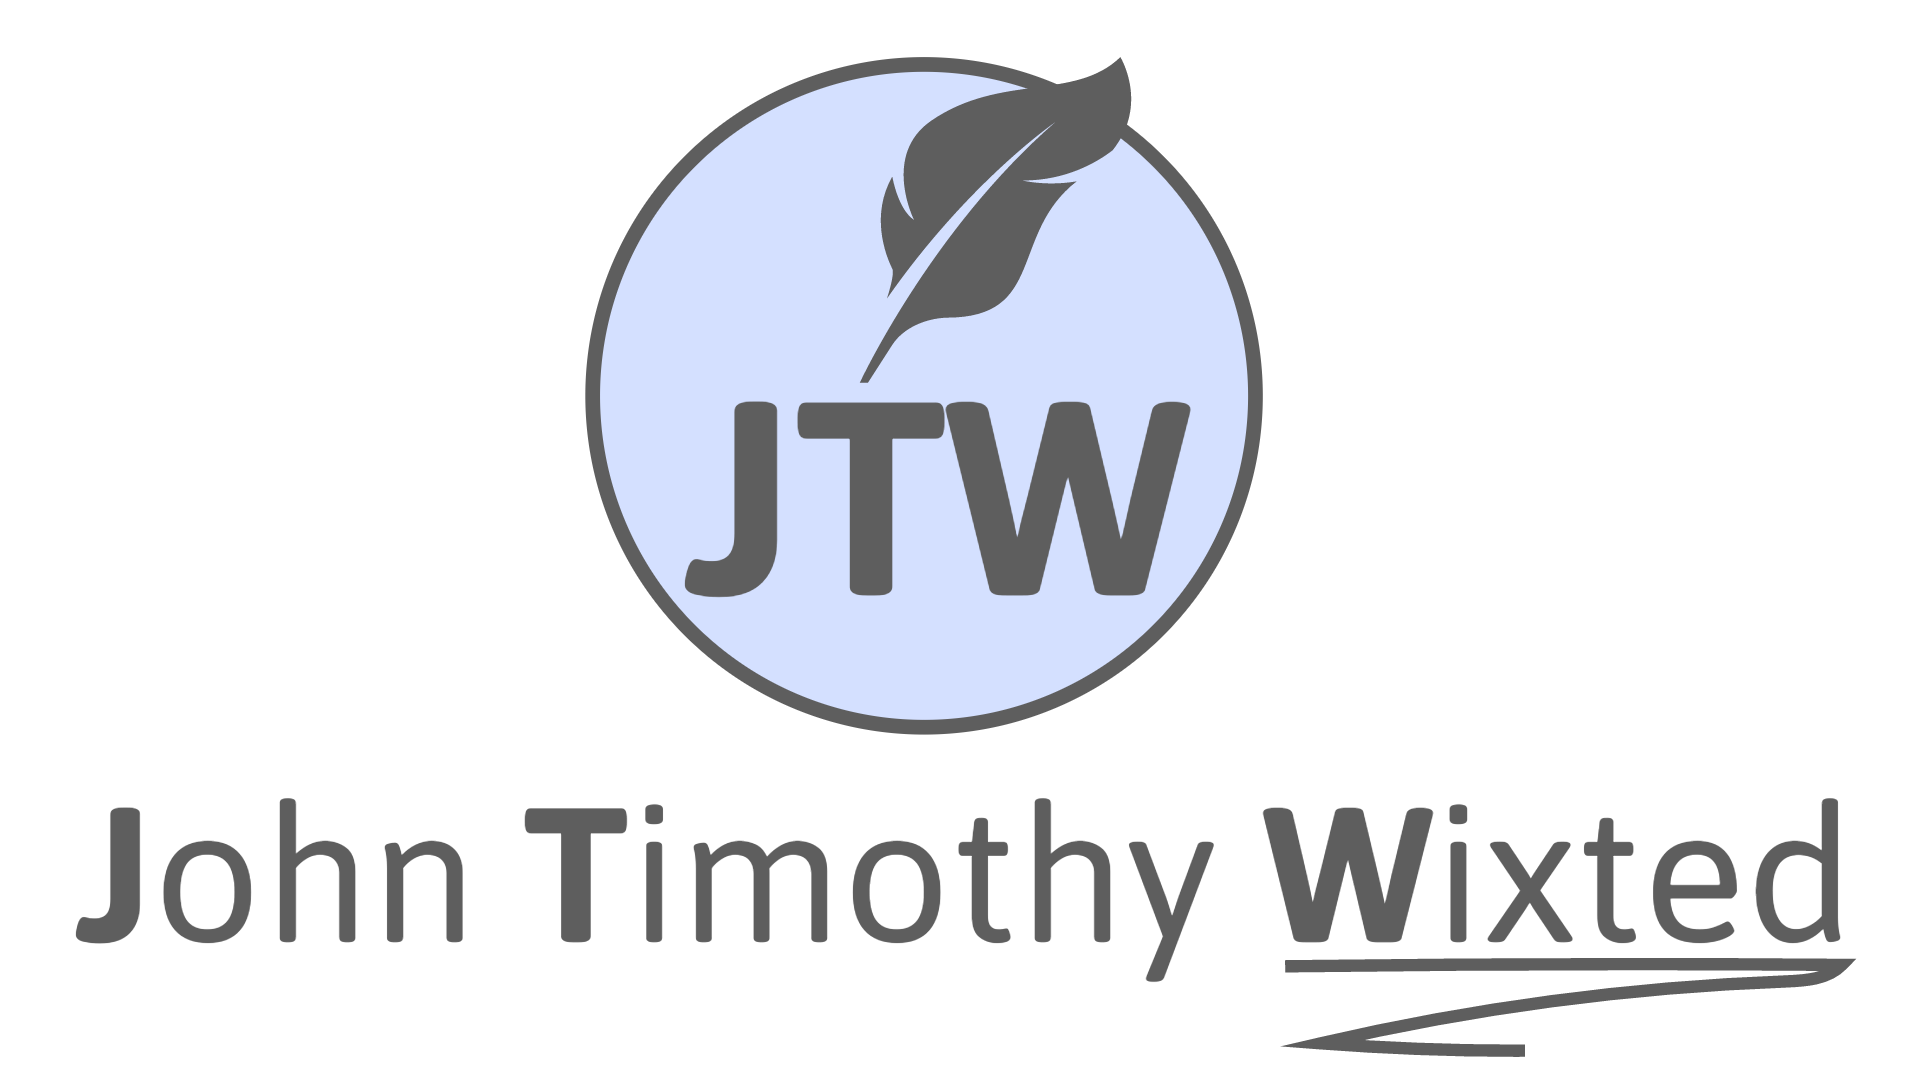 John Timothy Wixted